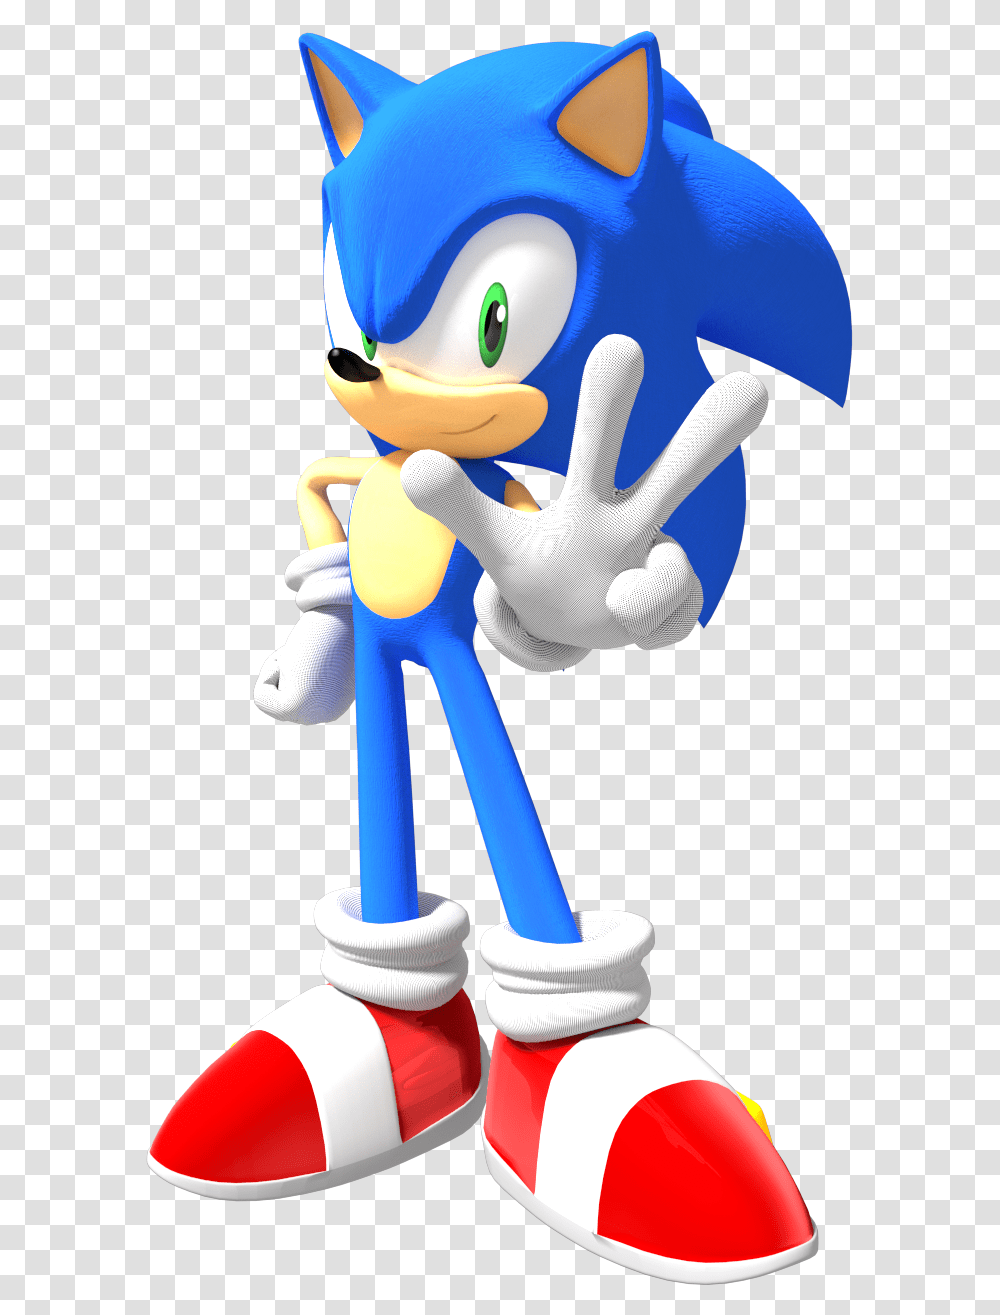 Classic Sonic The Hedgehog Sonic The Hedgehog Pose, Toy, Figurine, Pac Man, Inflatable Transparent Png